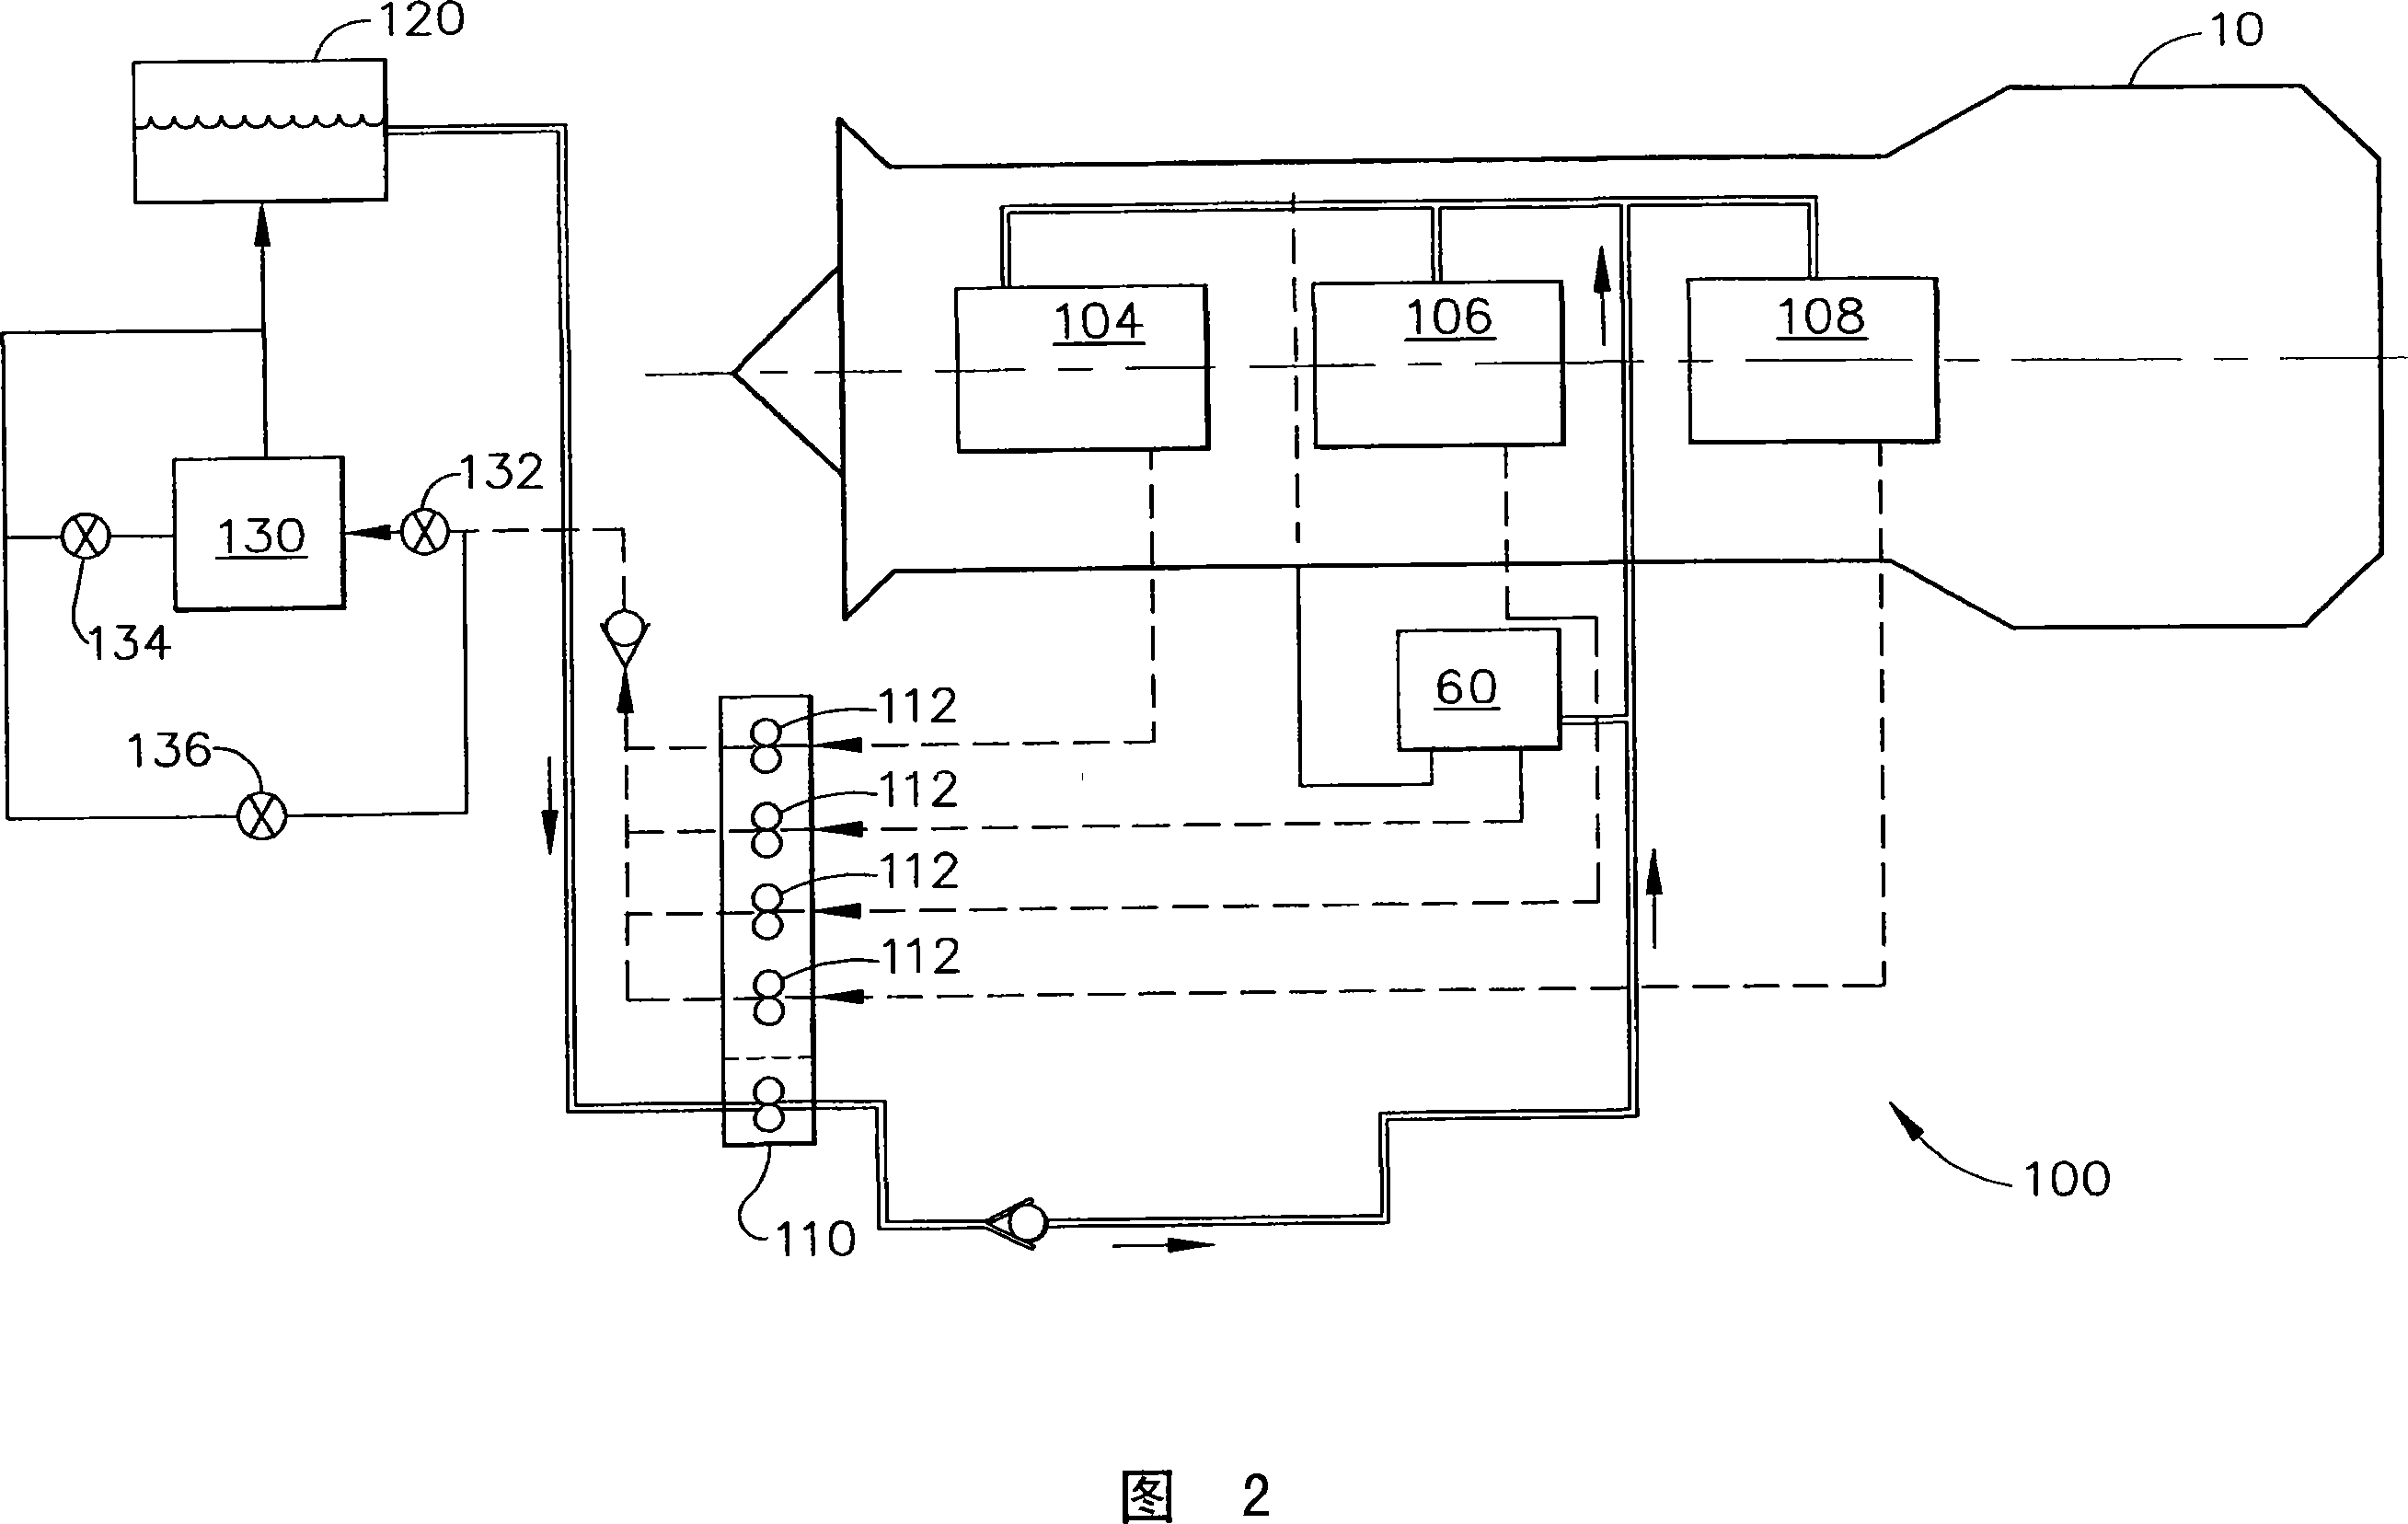 Heat exchanger assembly for a gas turbine engine